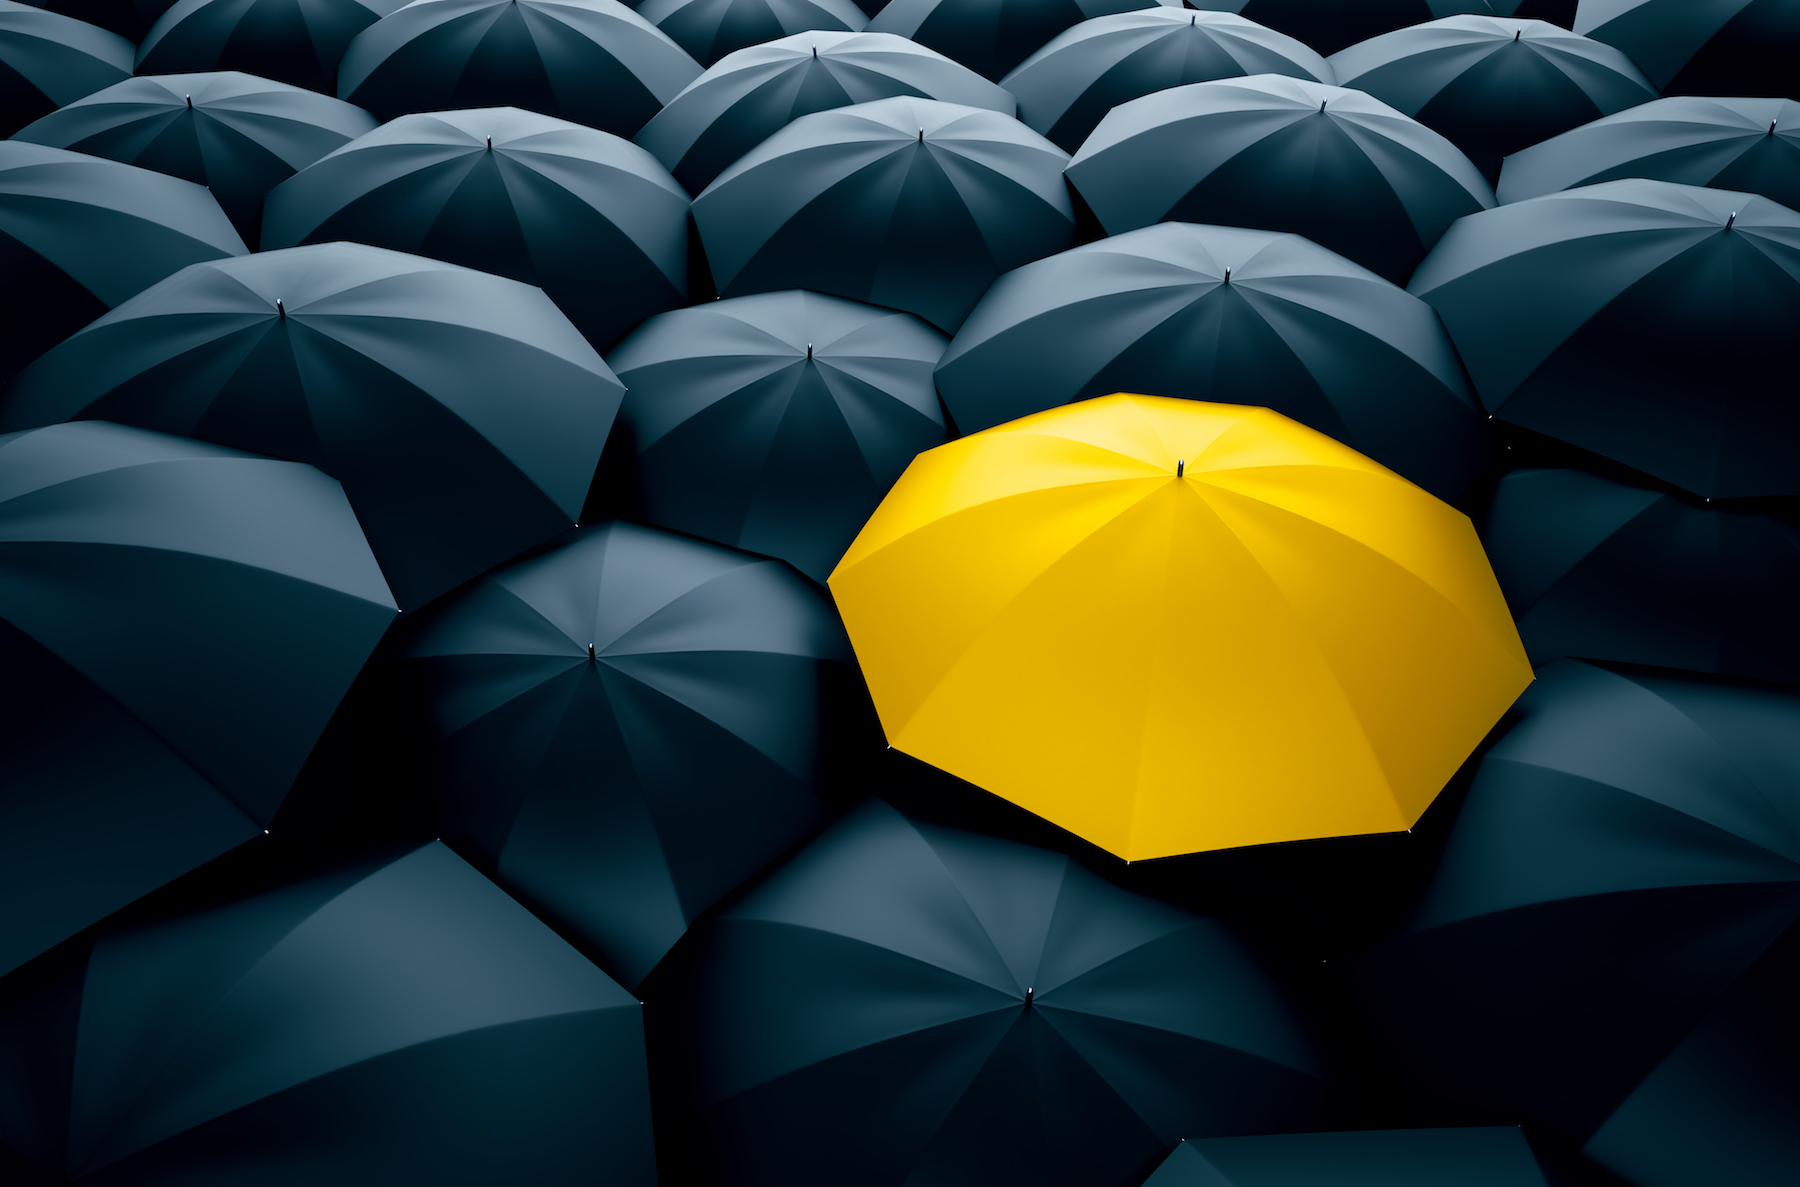 10 tips to stand out from the crowd